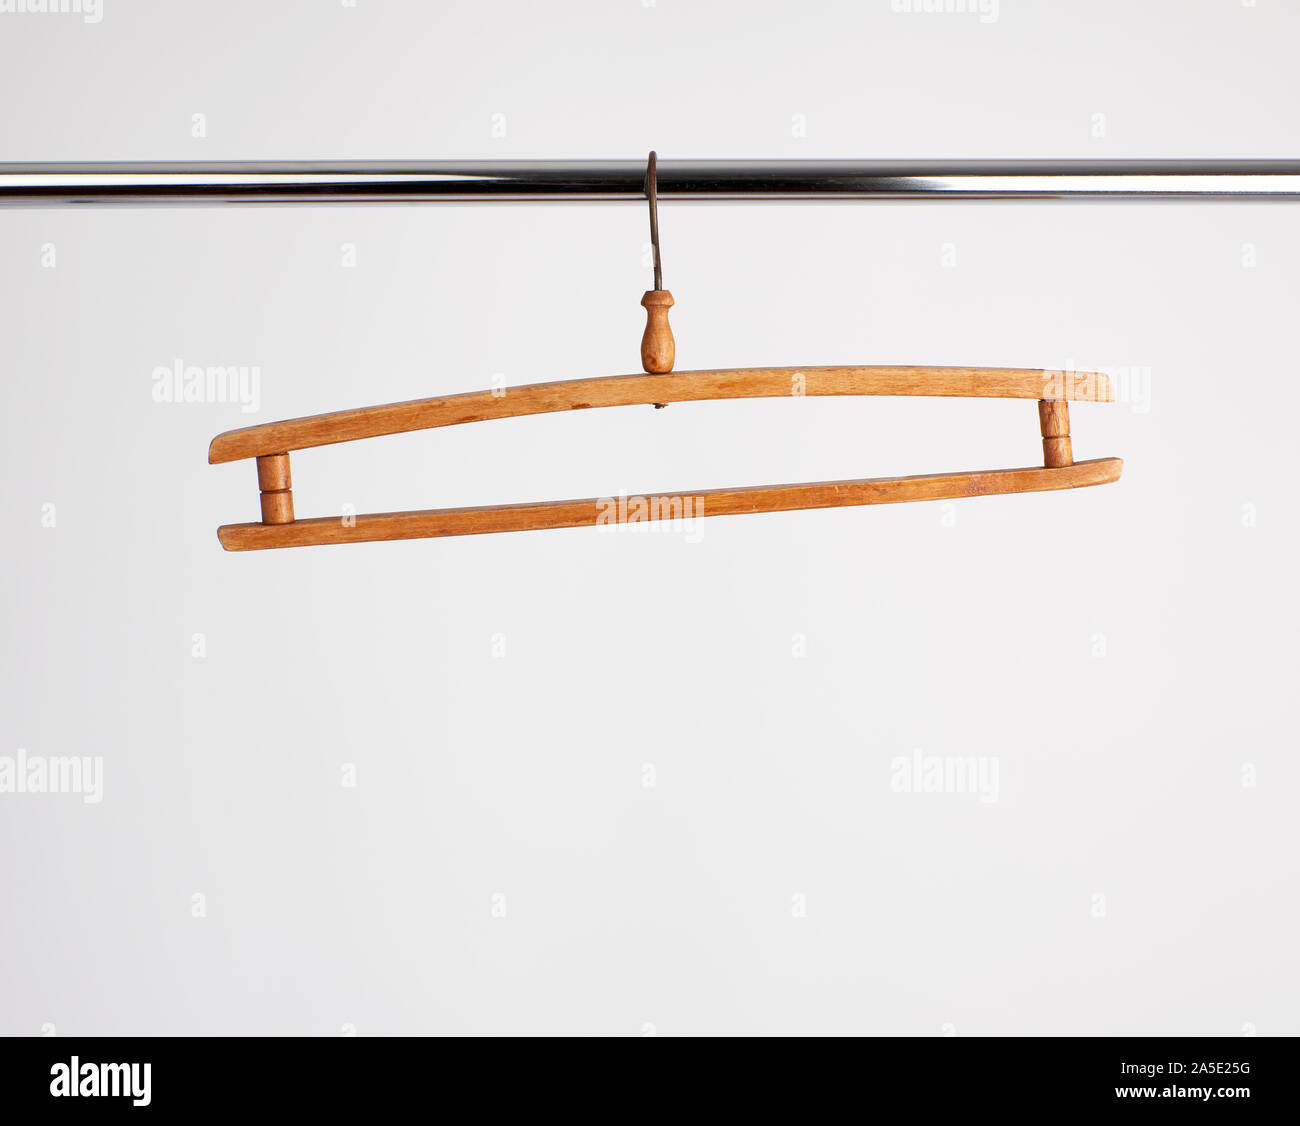 vintage wooden hanger hanging on a metal pipe, white background Stock Photo